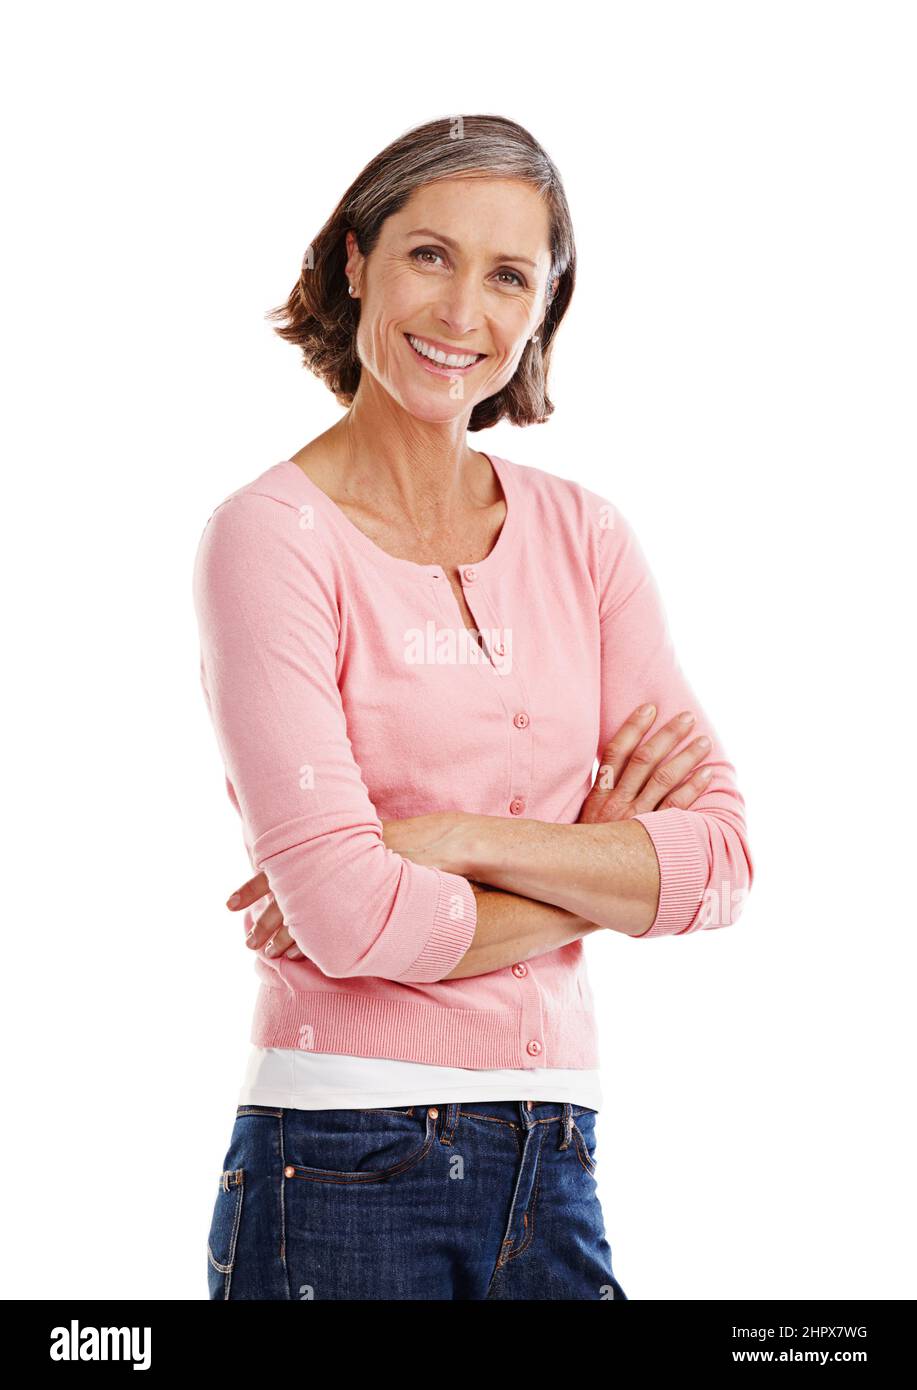 Shes got confidence. Cropped studio portrait of an attractive mature woman in casualwear. Stock Photo